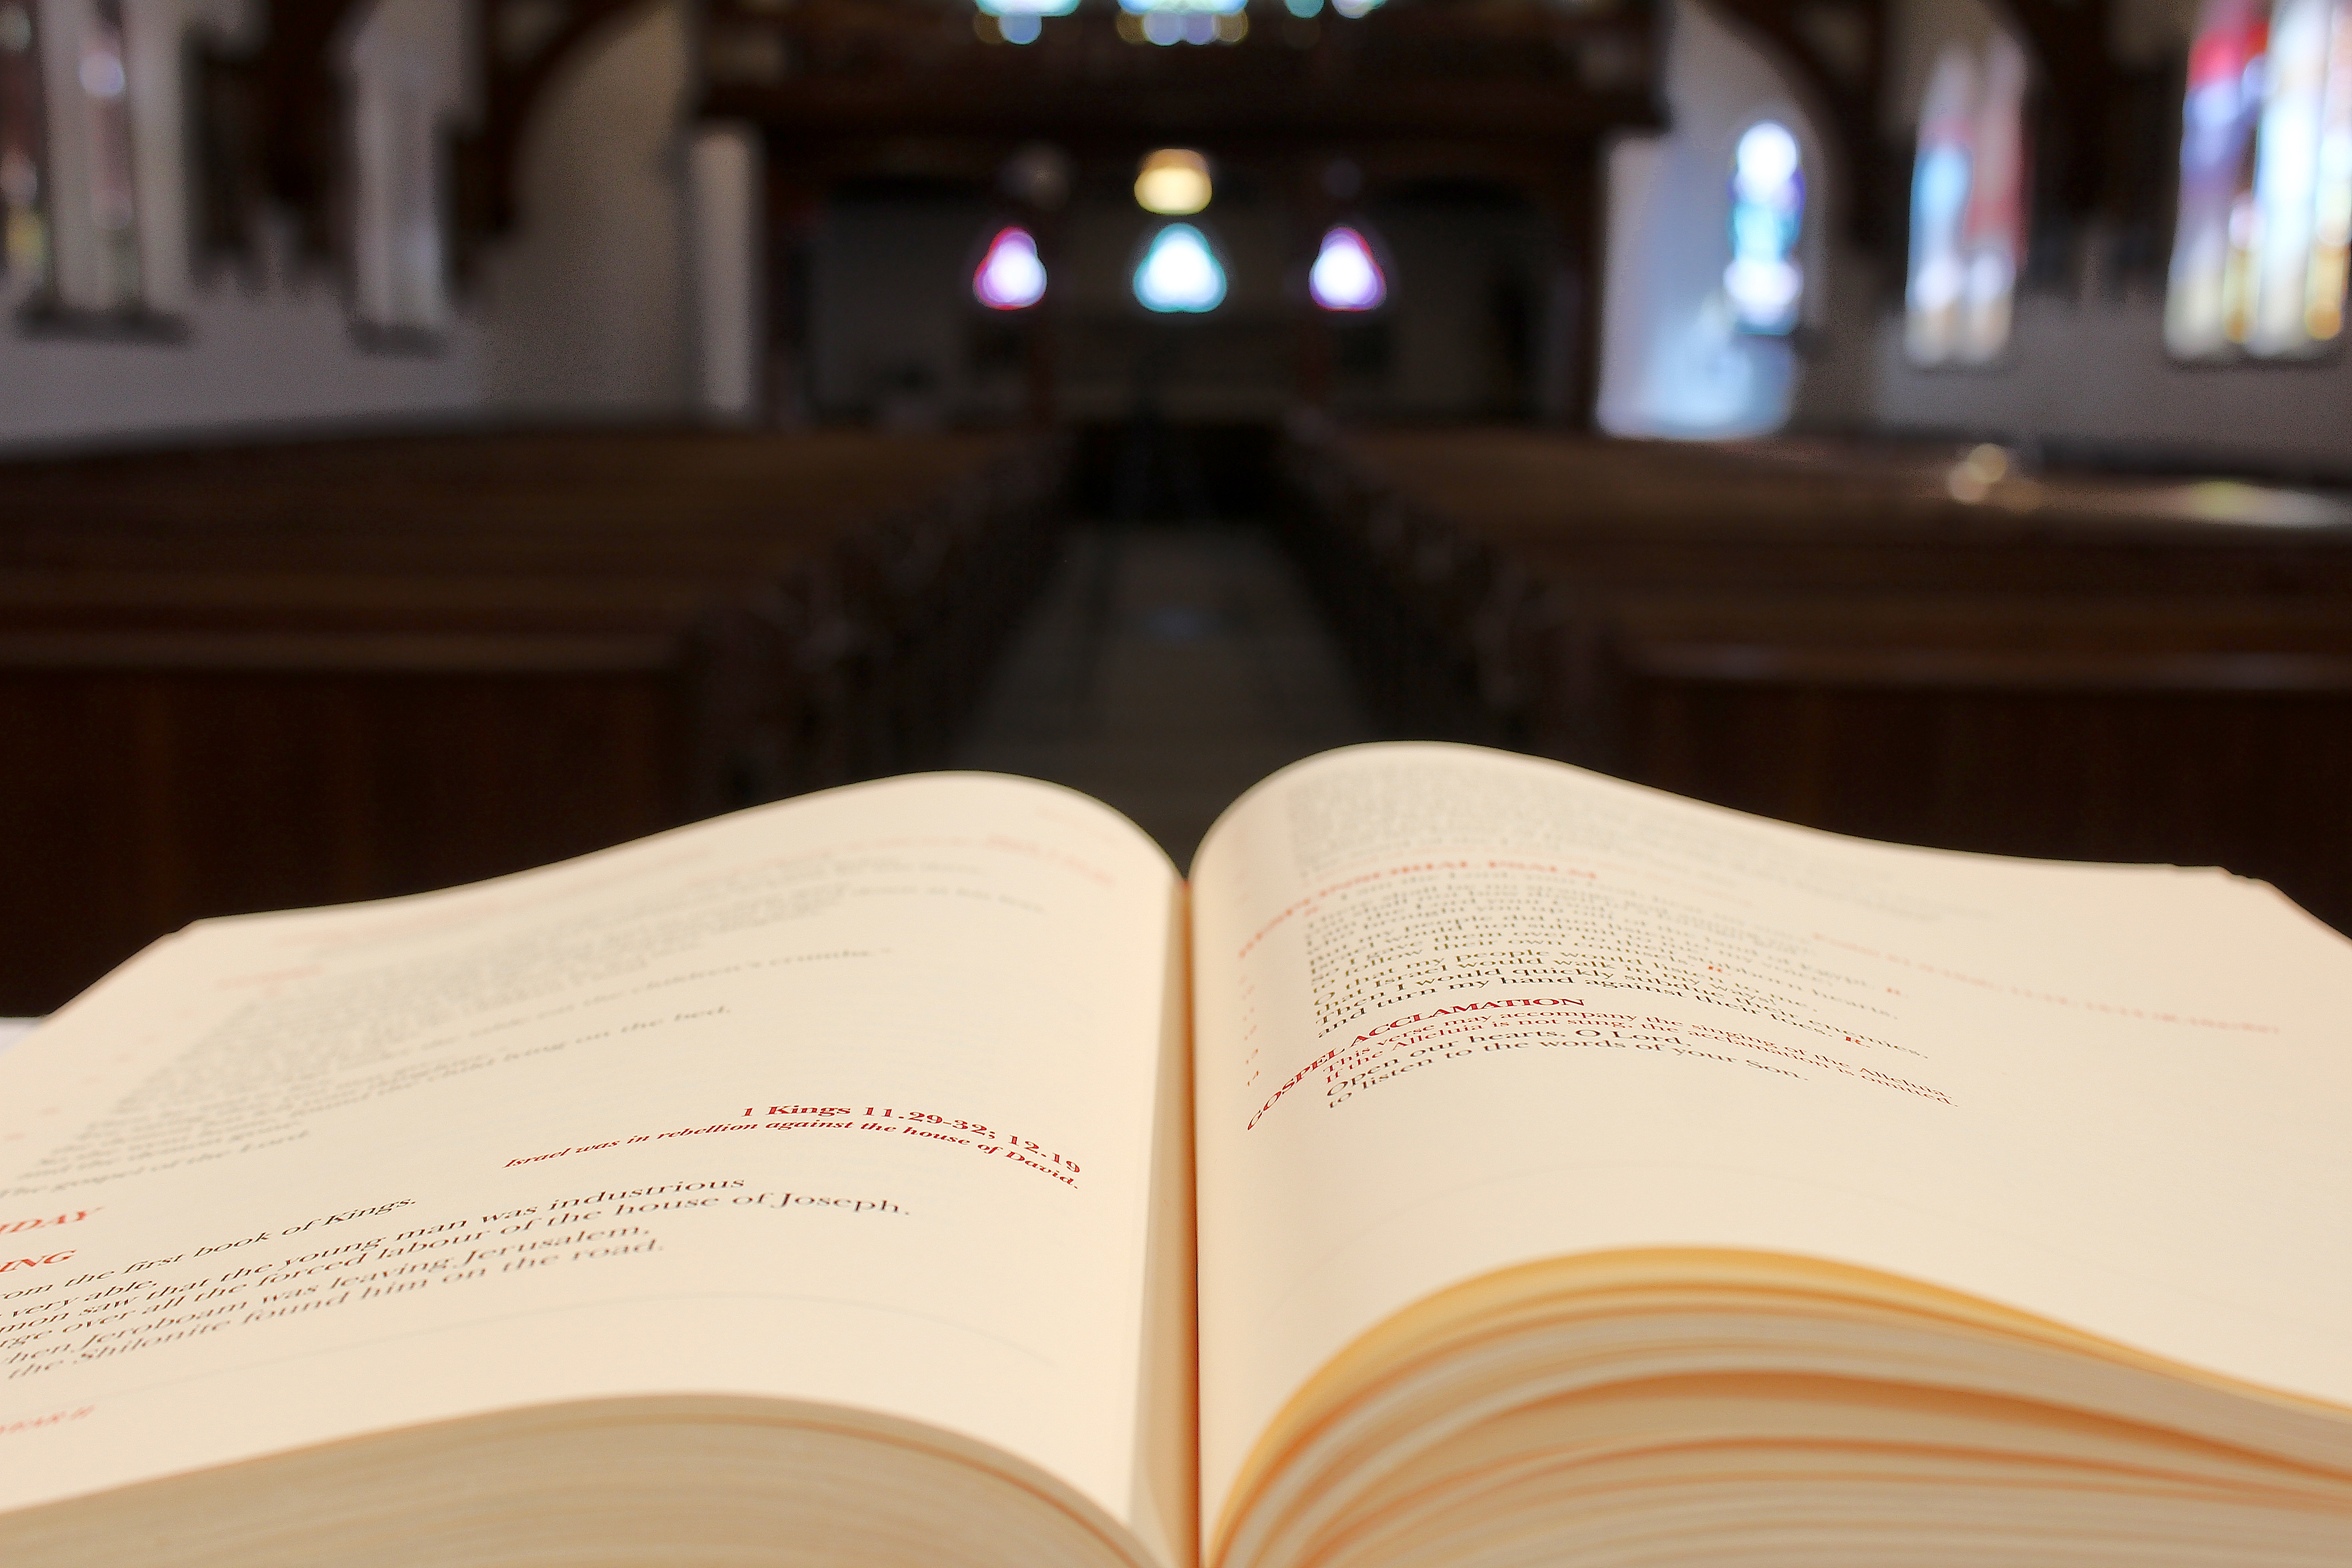 An open lectionary with a view of the church body in the background